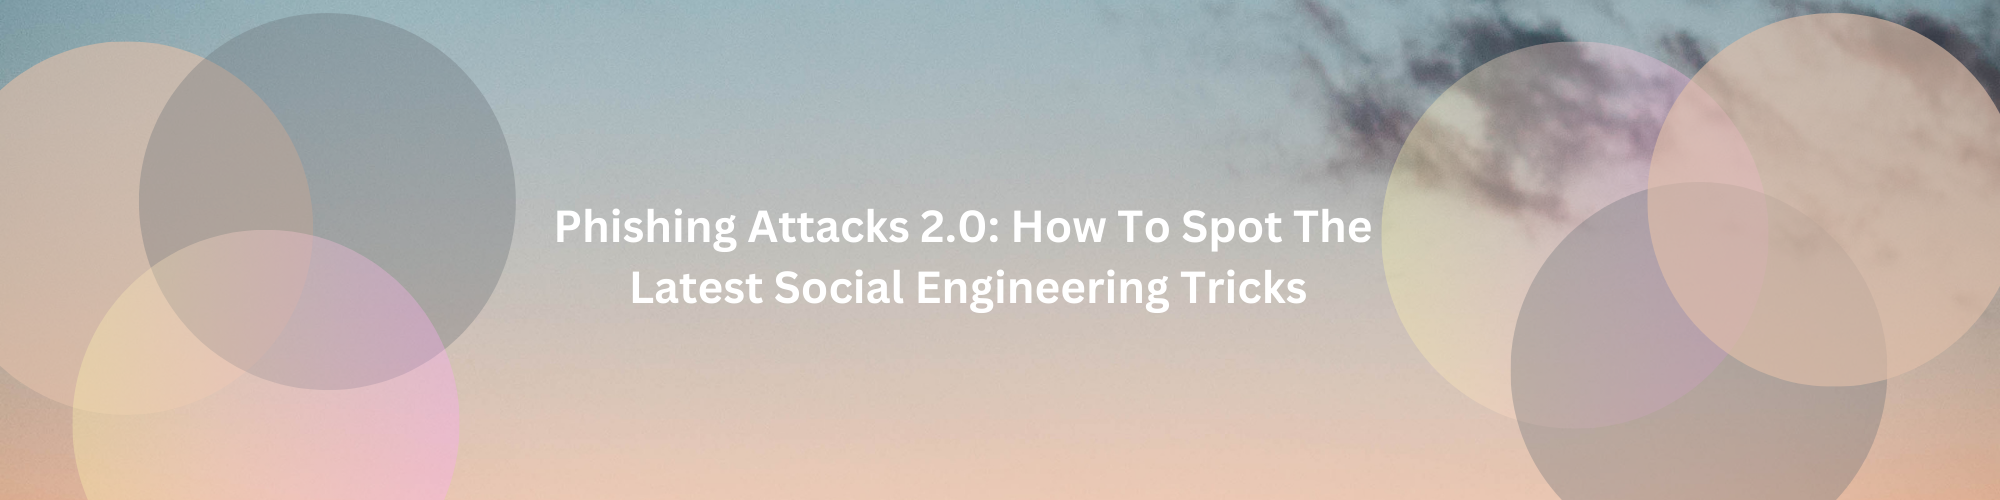 Phishing Attacks 2.0: How to spot the latest social engineering tricks.